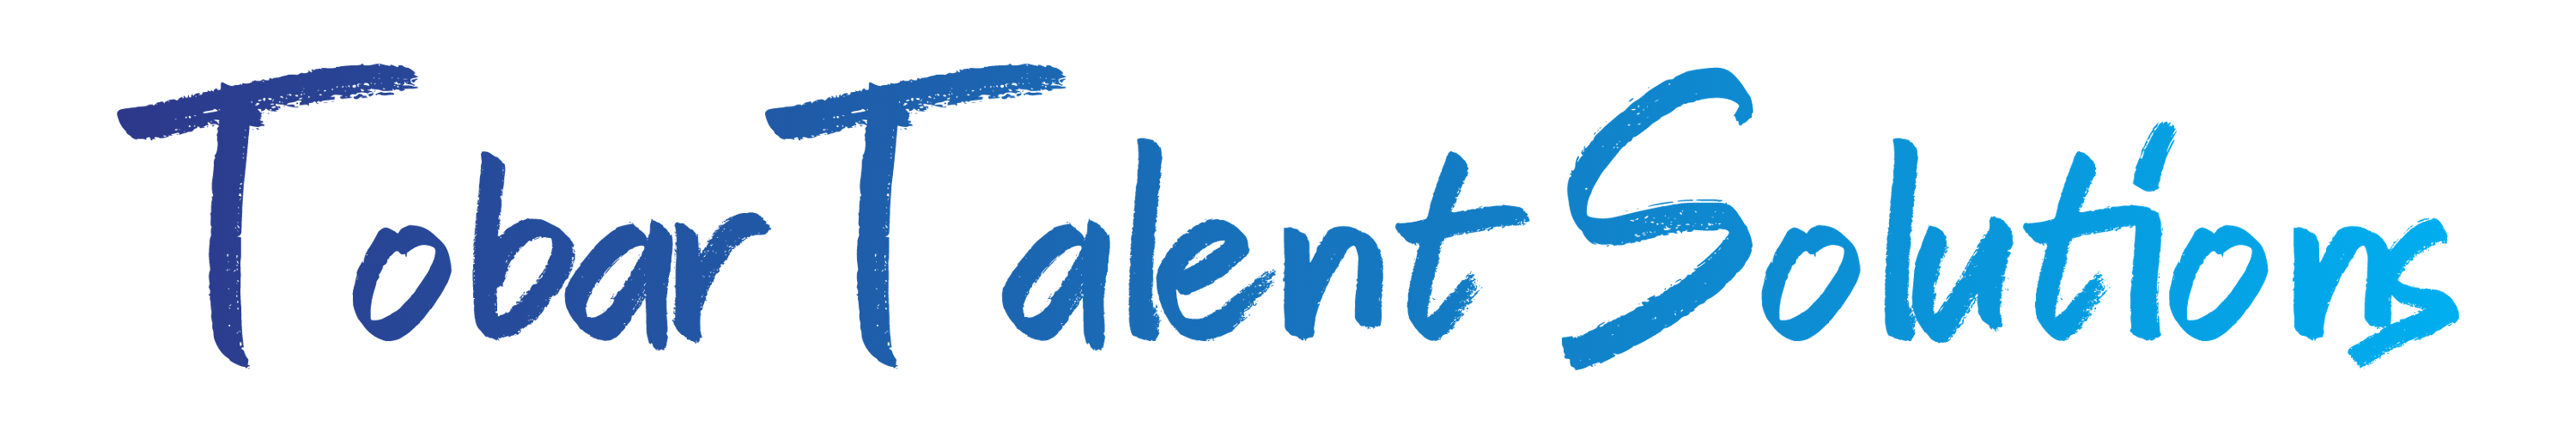 Tobar Talent Solutions background